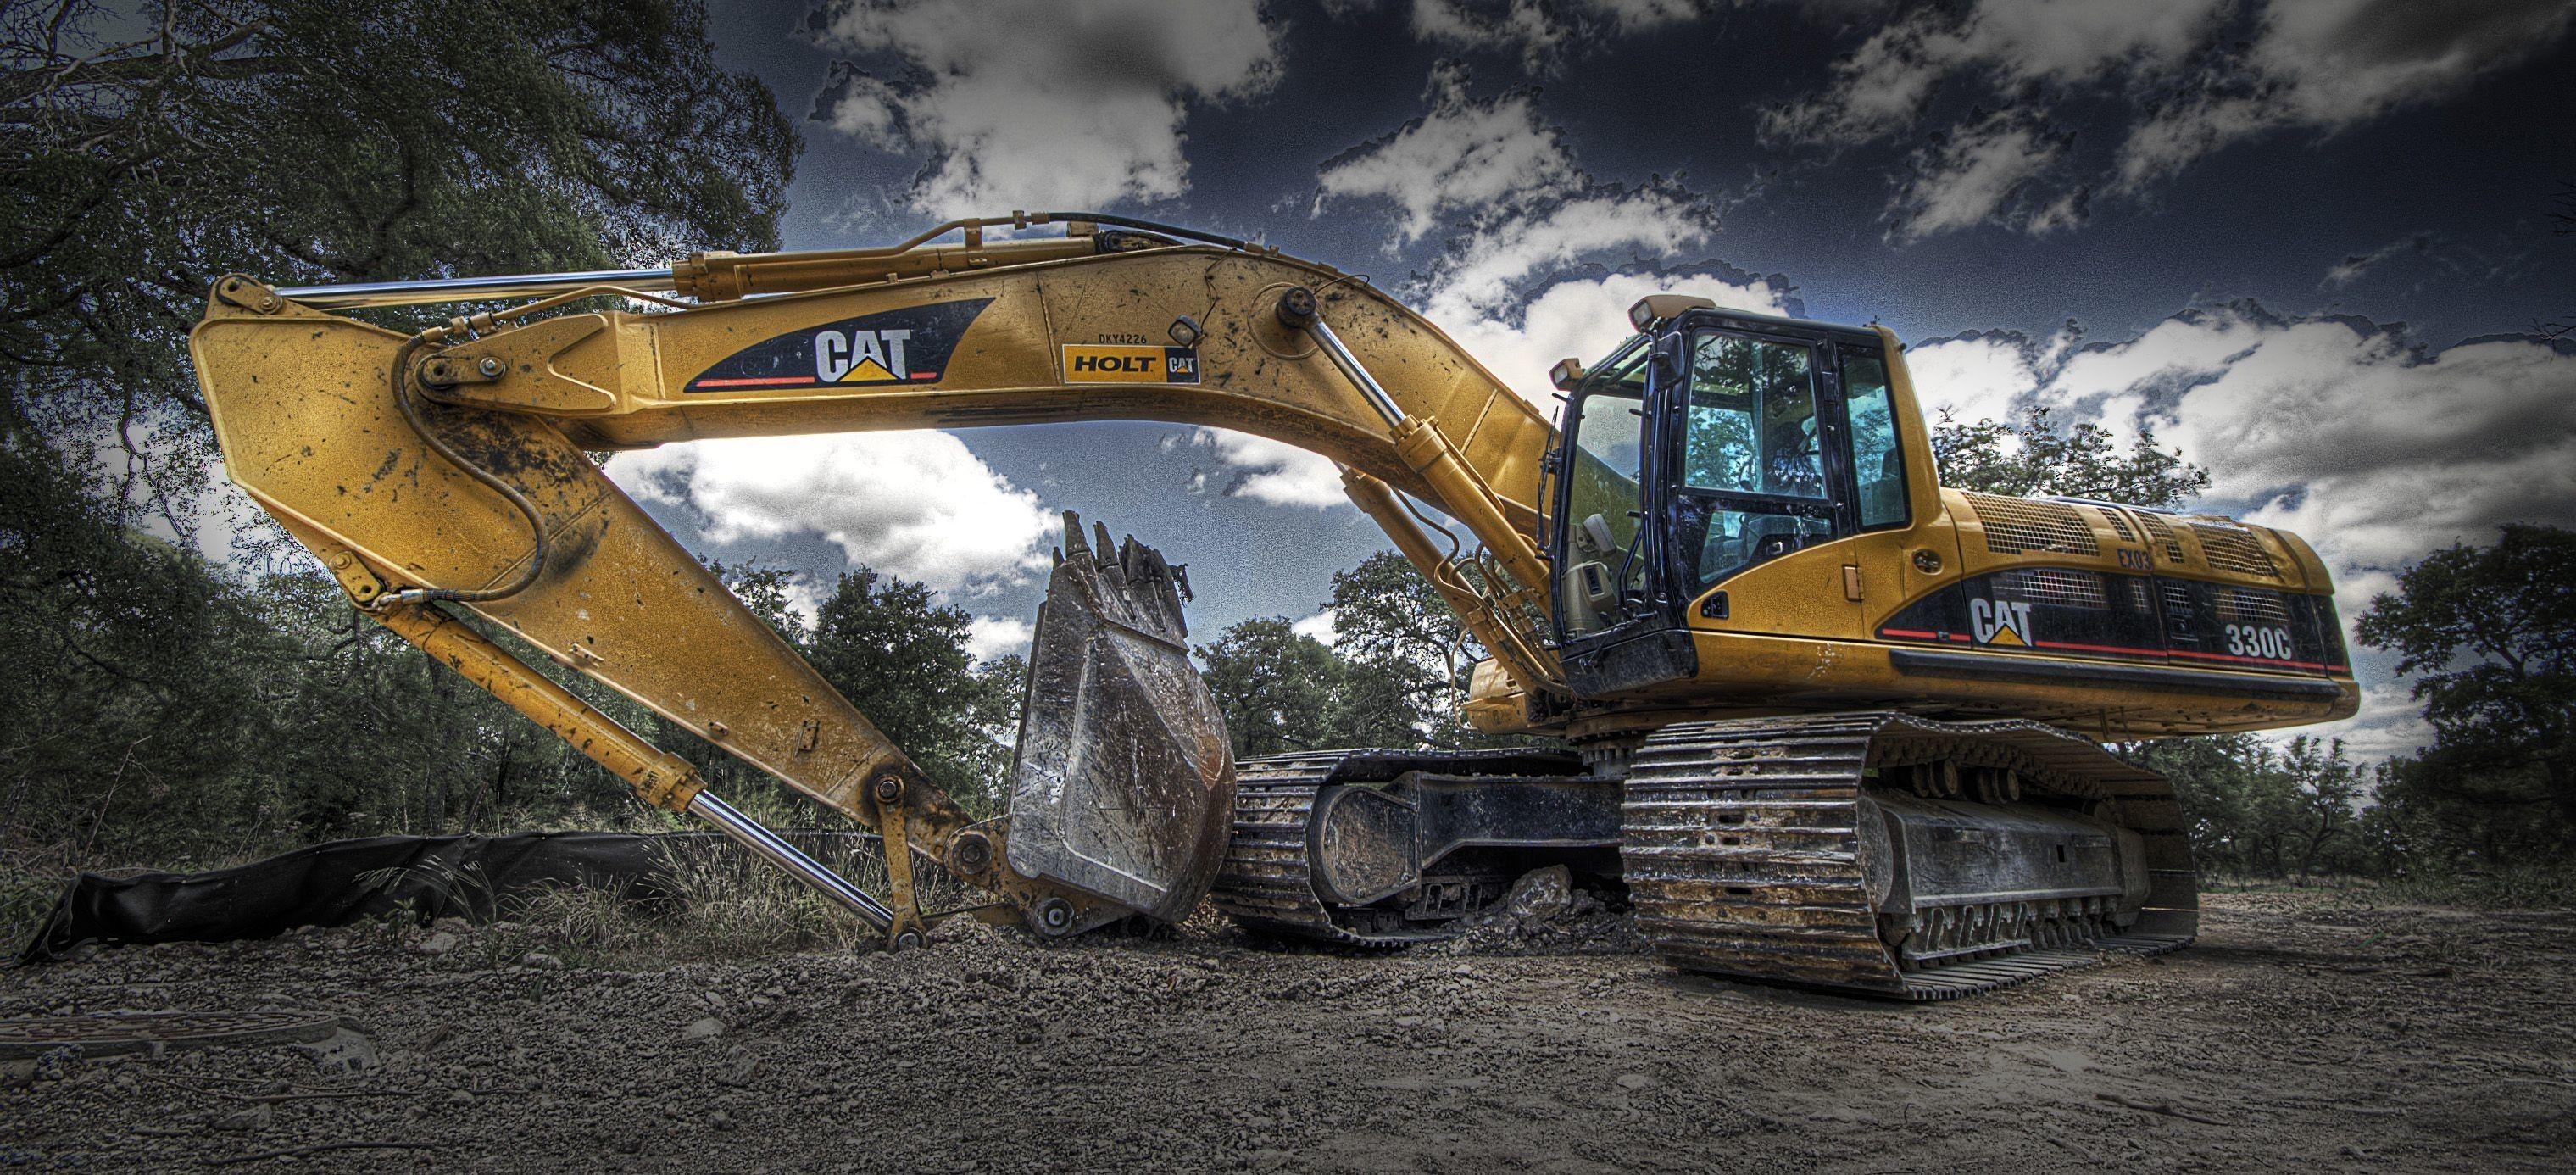 Download Excavator wallpapers for mobile phone free Excavator HD  pictures